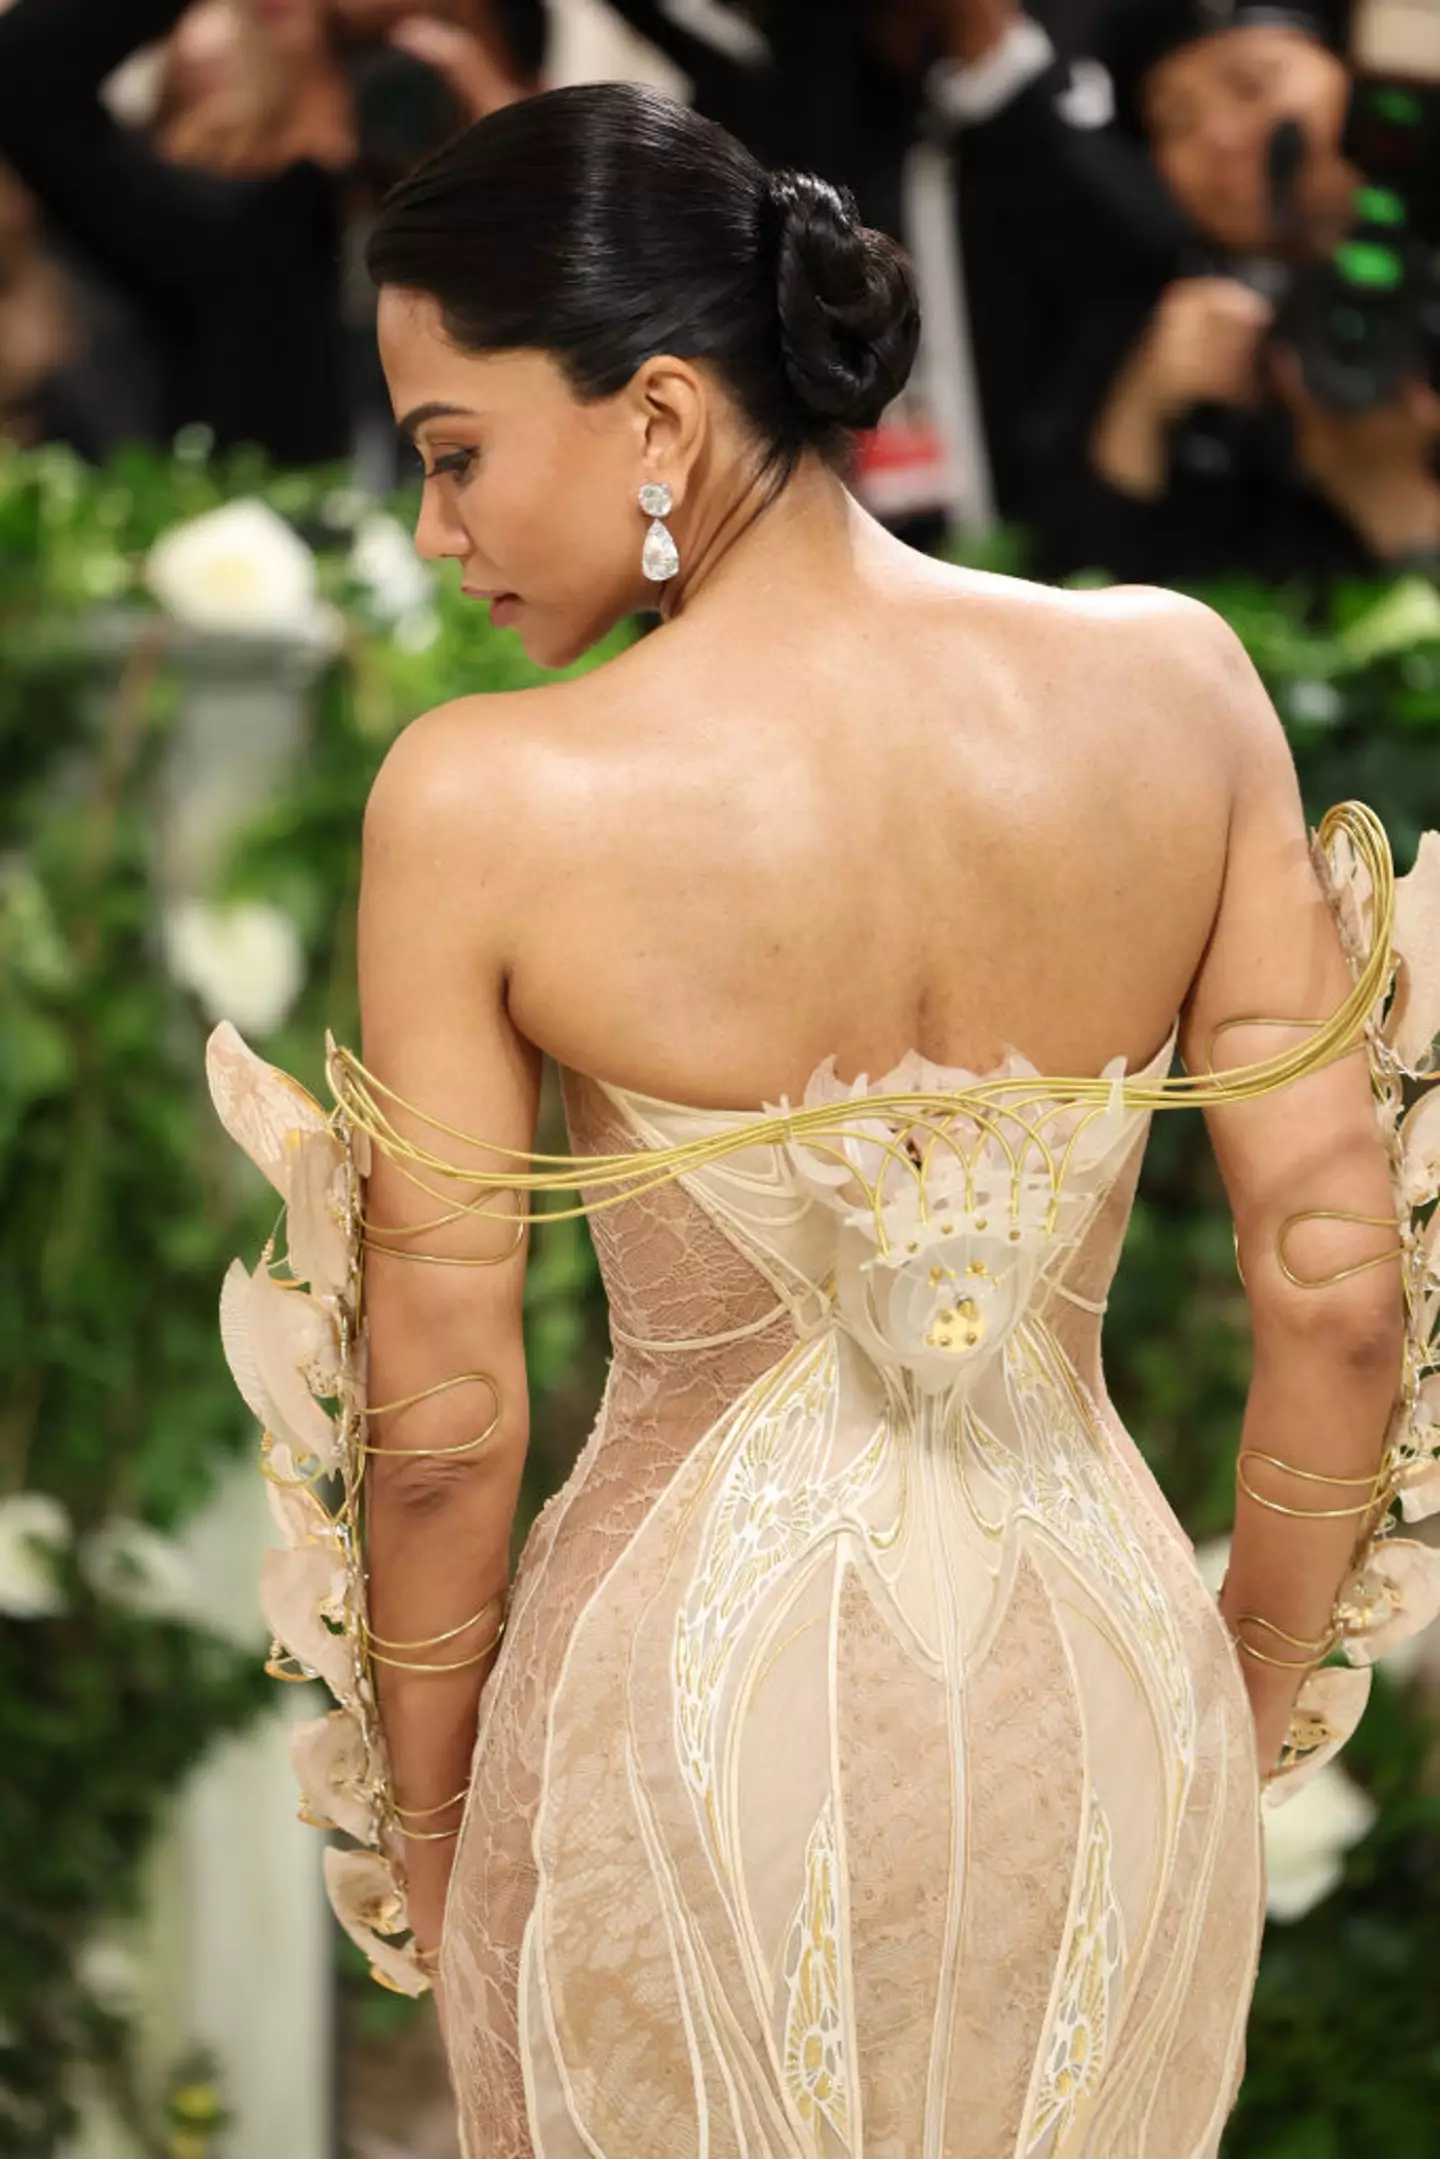 Met Gala viewers were amazed by the dress. (Aliah Anderson/Getty Images)